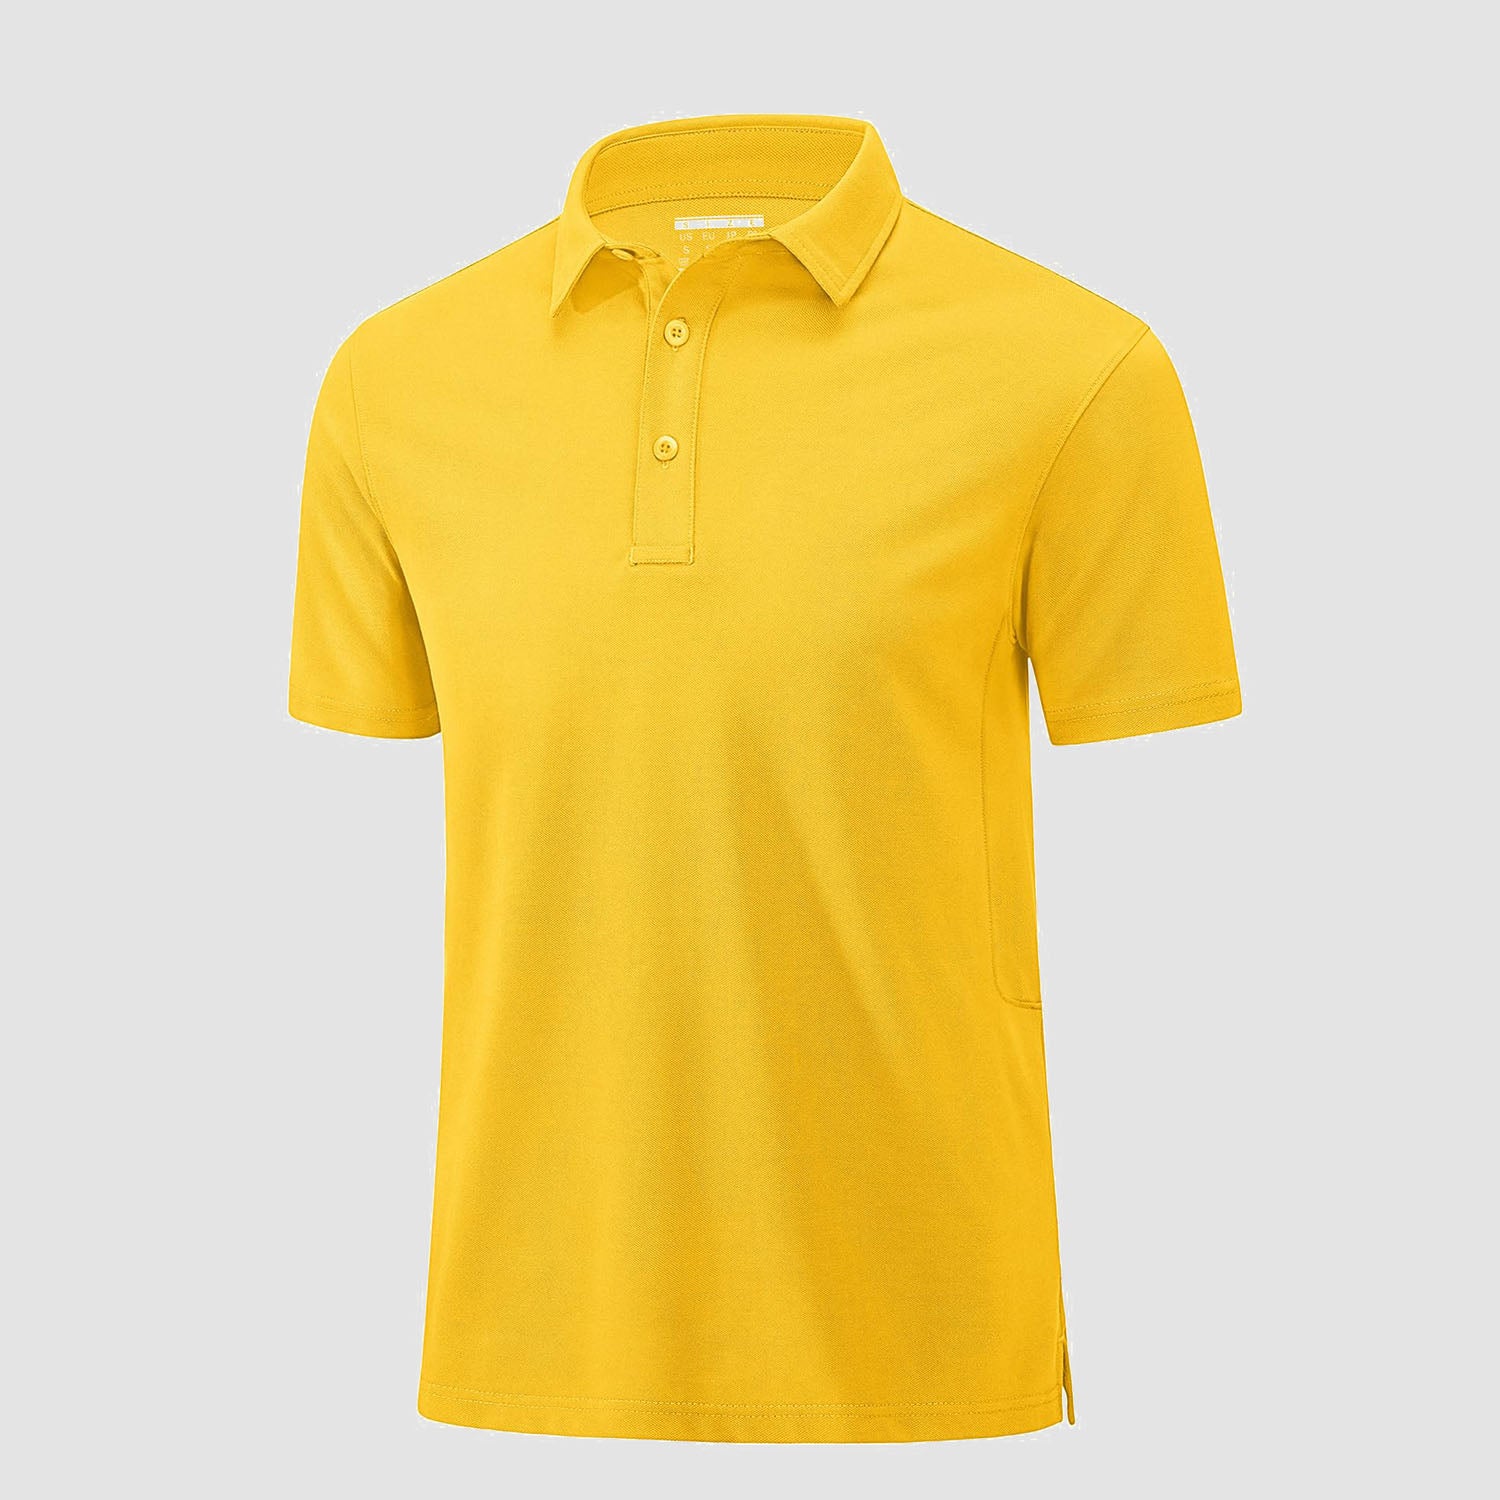 【Buy 4 Get the 4th Free！】Men's Polo Shirts Short Sleeve Cotton Golf Shirt Casual Collared Shirt Lightweight